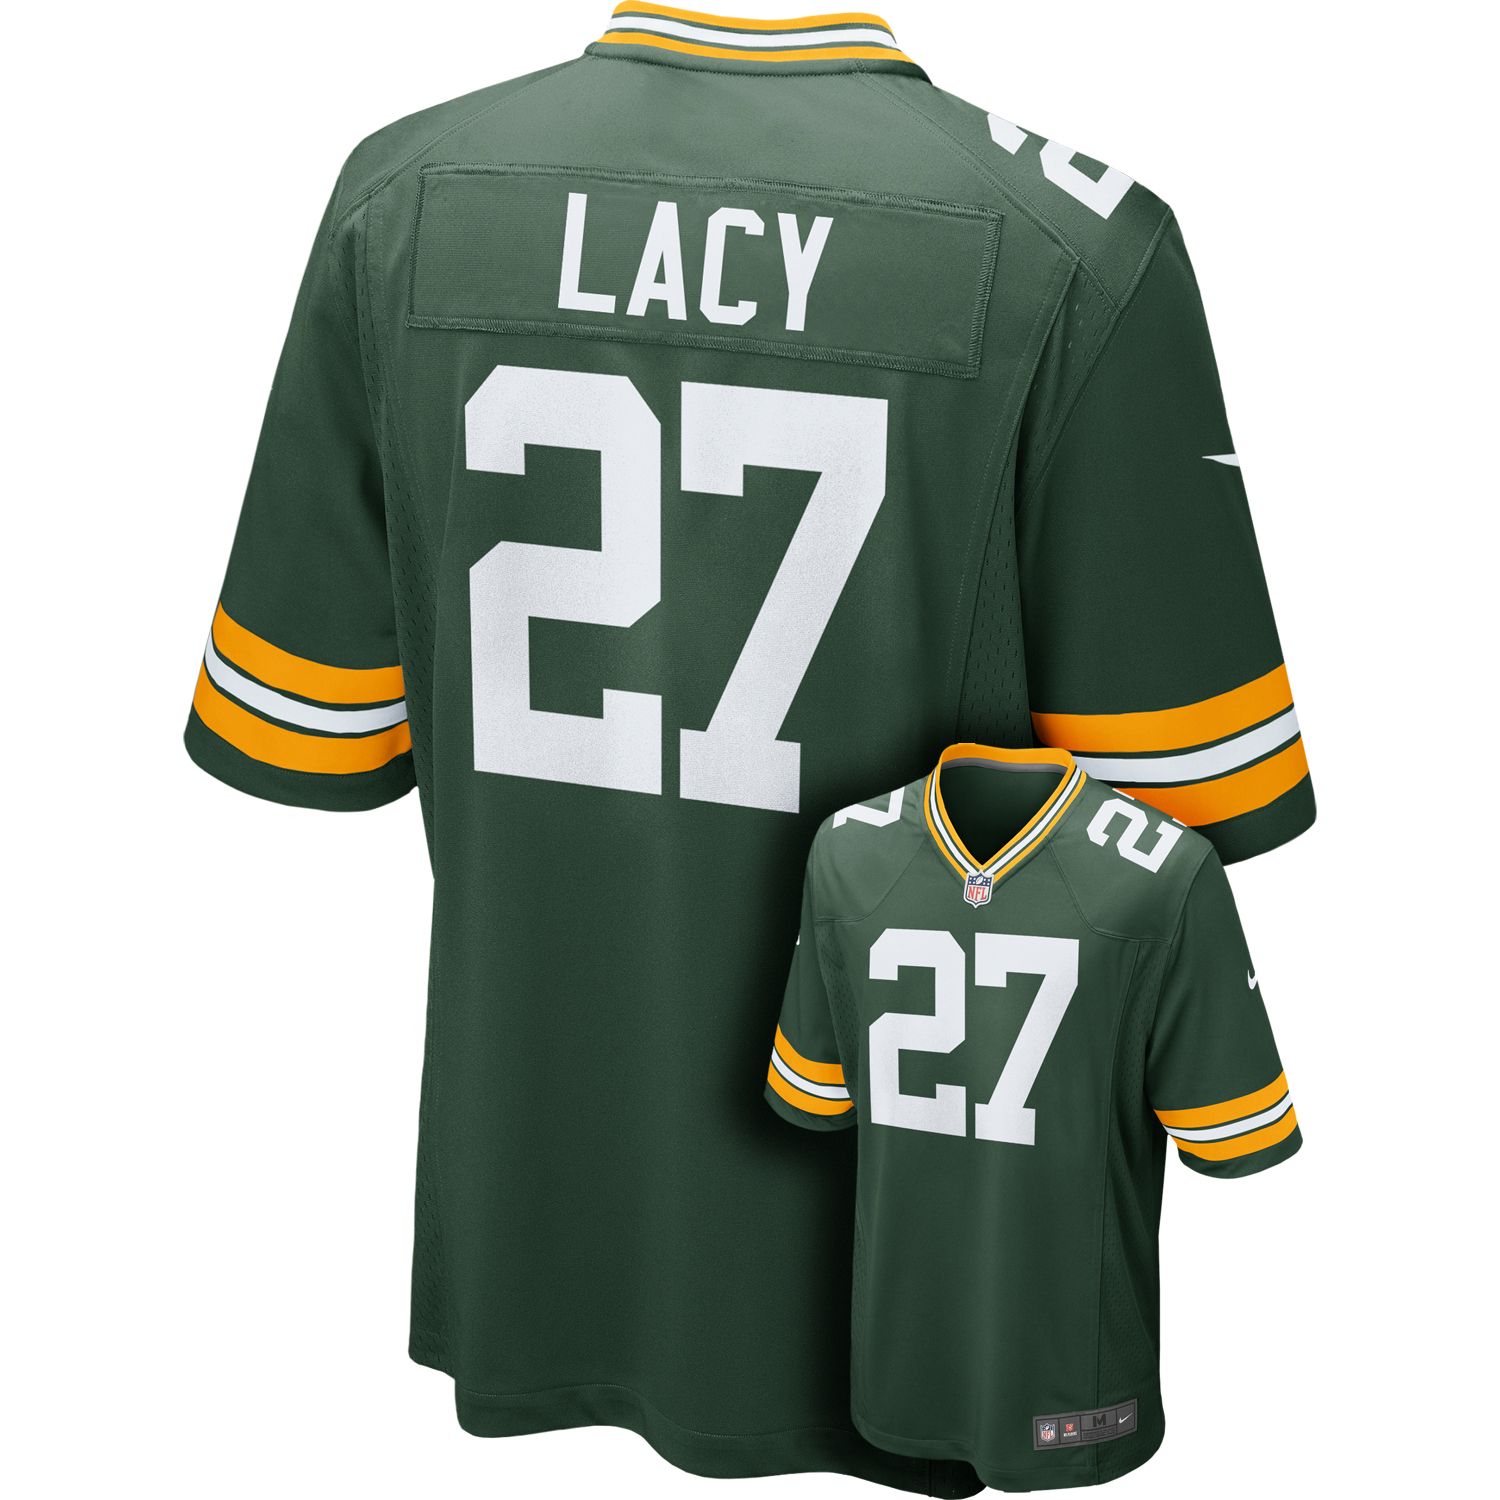 eddie lacy packers jersey